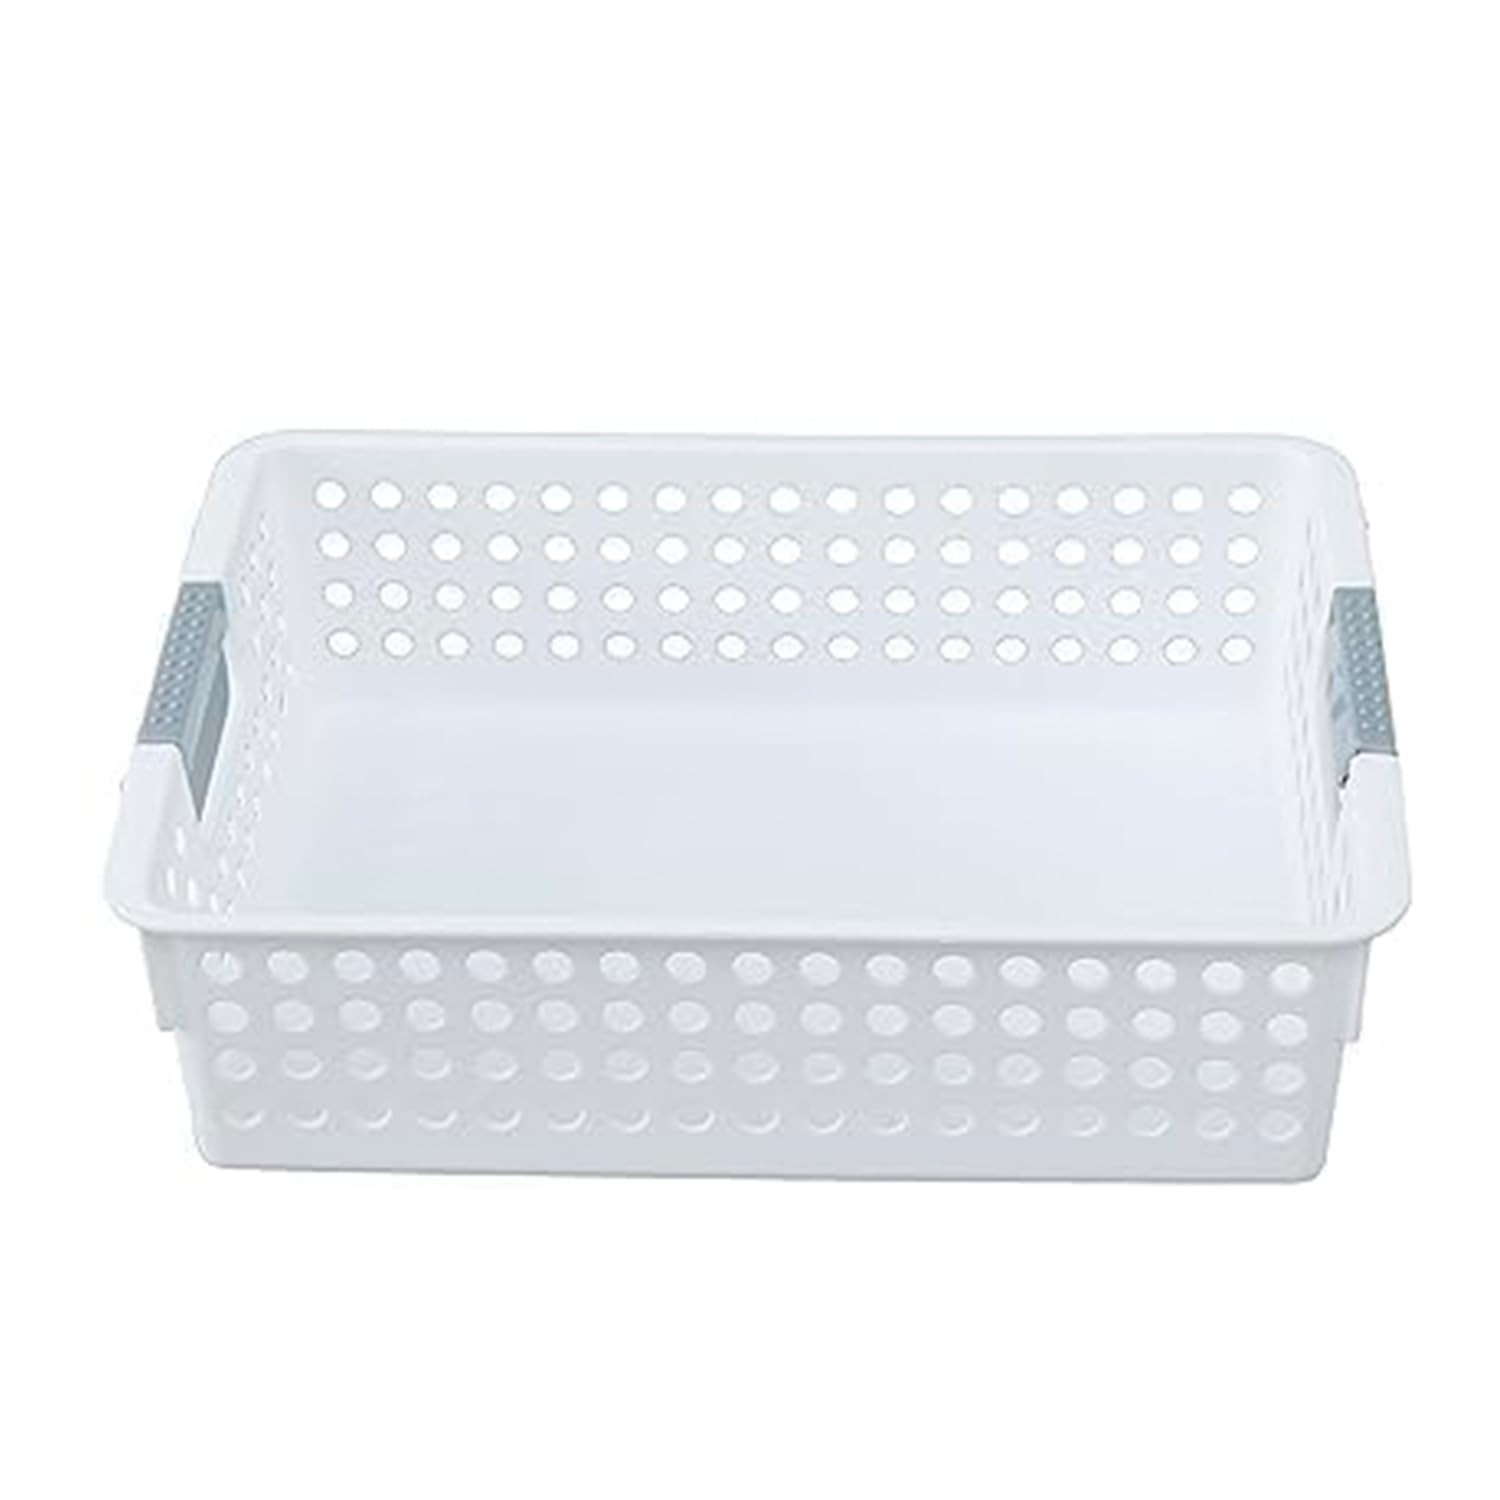 Kuber Industries Set of 1 Large Hollow Storage Basket|Kitchen & Home Organizer For Wardrobe|Tray For Toys, Fruits, Books (White)